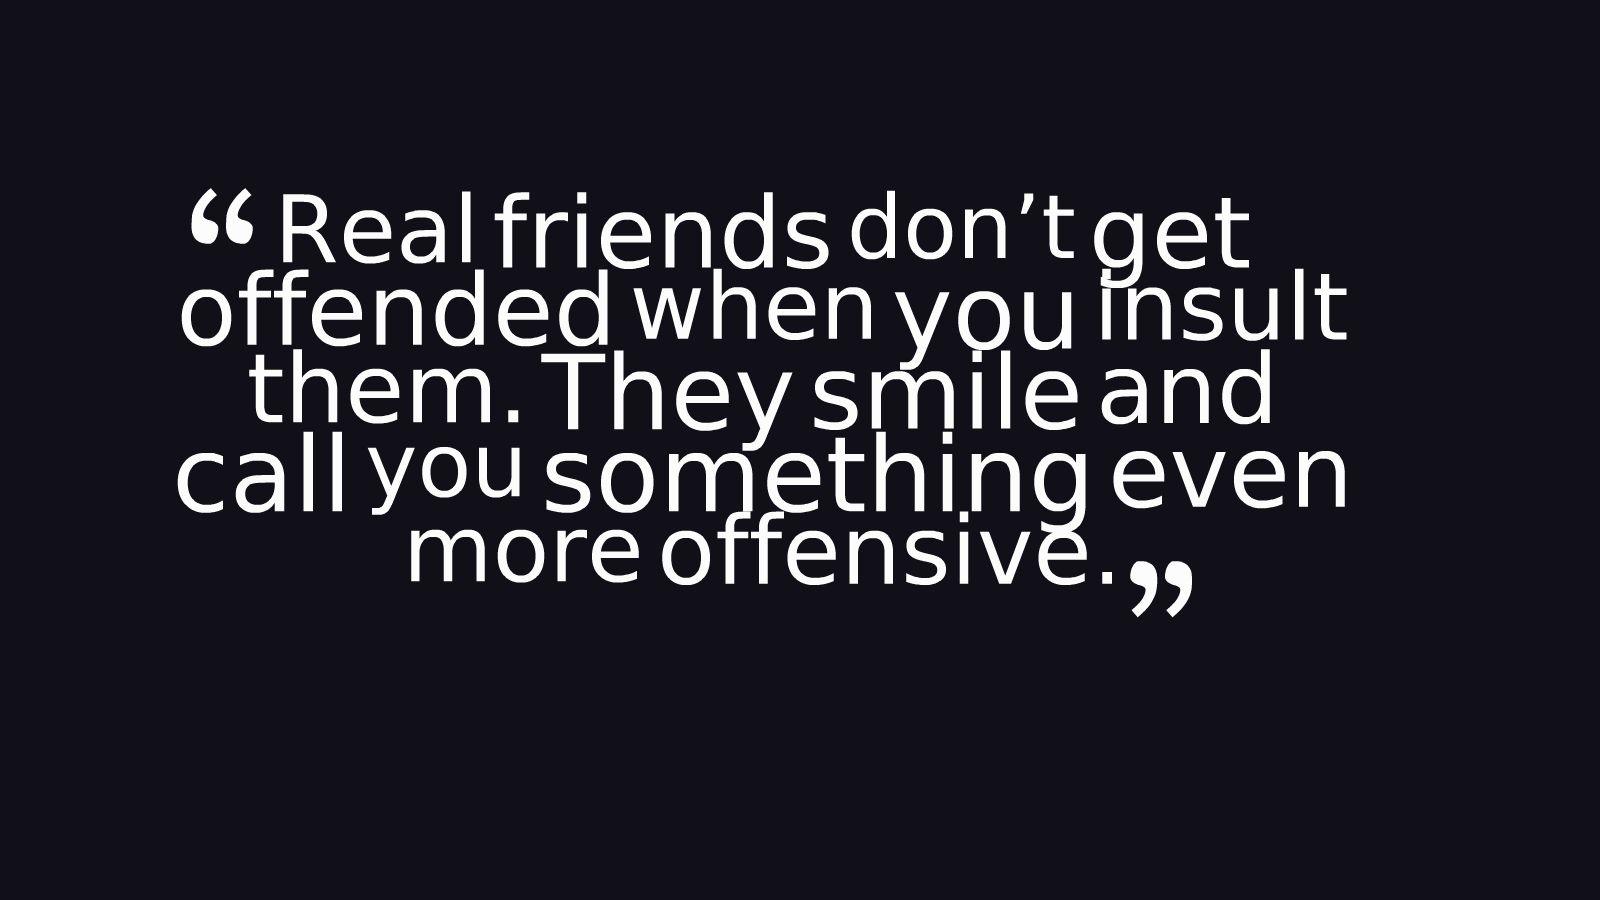 Friend Pictures With Quotes 28+ Fake Friends Quotes Image For